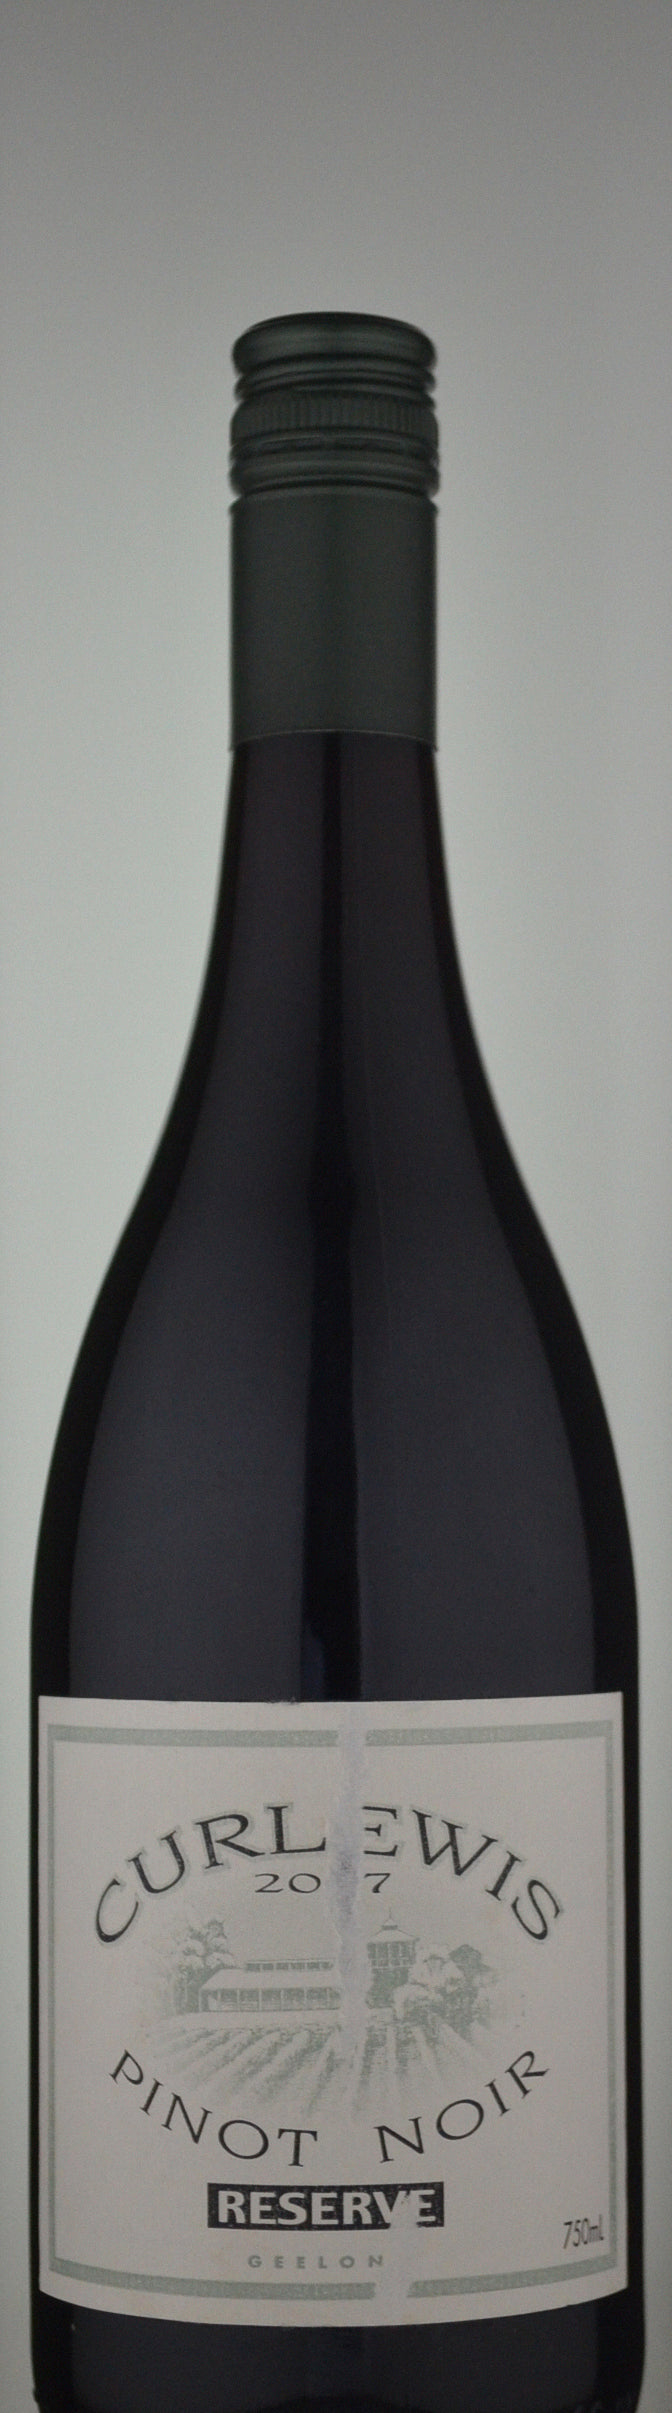 Curlewis Reserve Pinot Noir 2007